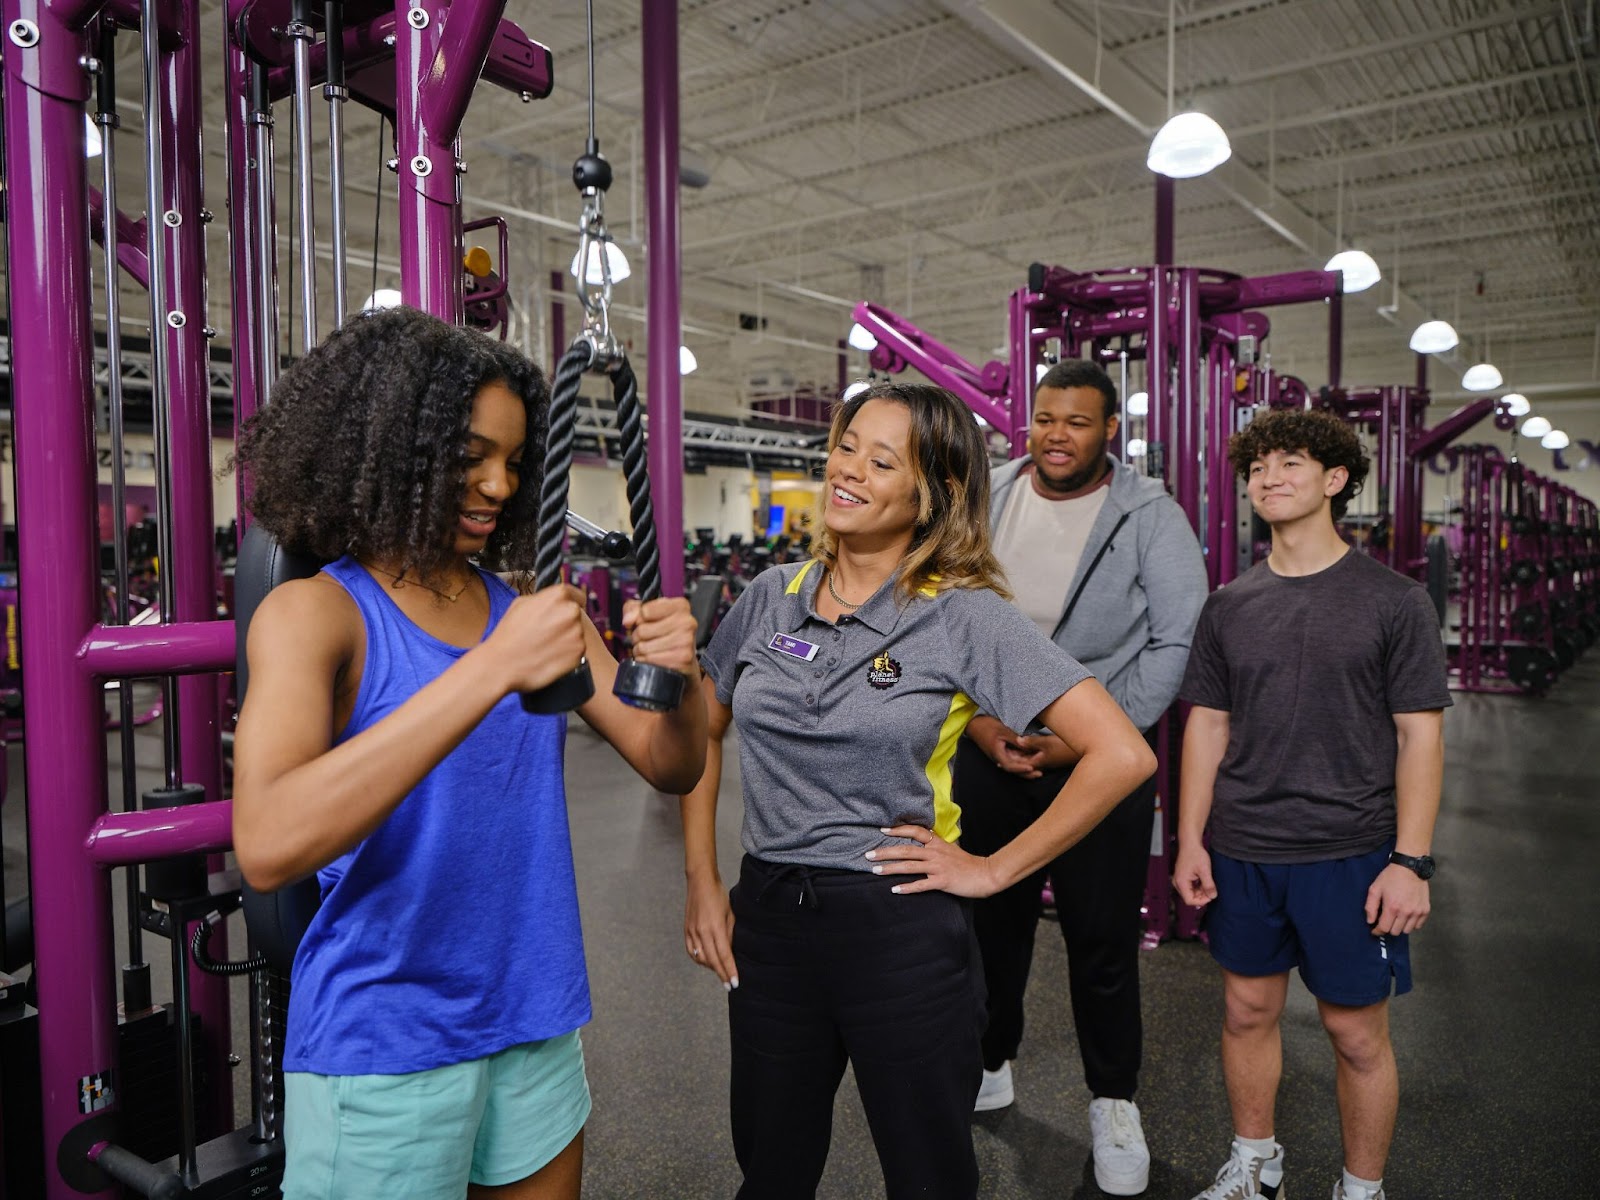 Students workout at Planet Fitness.